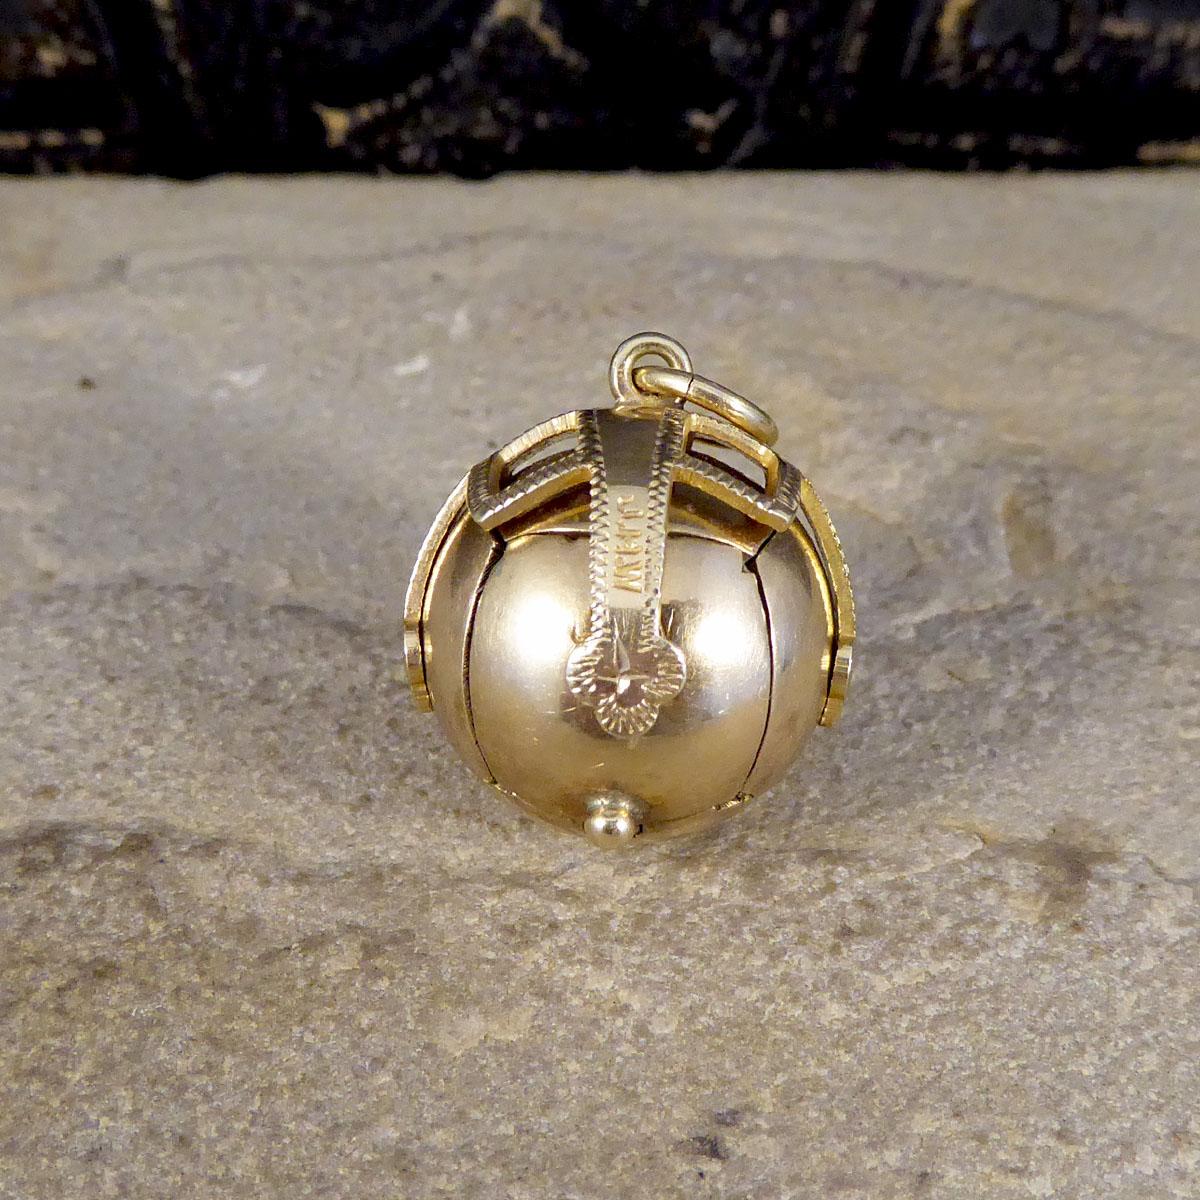 This lovely folding orb pendant appears initially to be a sphere, however when unhinged opens out to show a cross shape formed by six pyramids. On these, are a variety of masonic symbols including the tools of stonemasons to represent moral values